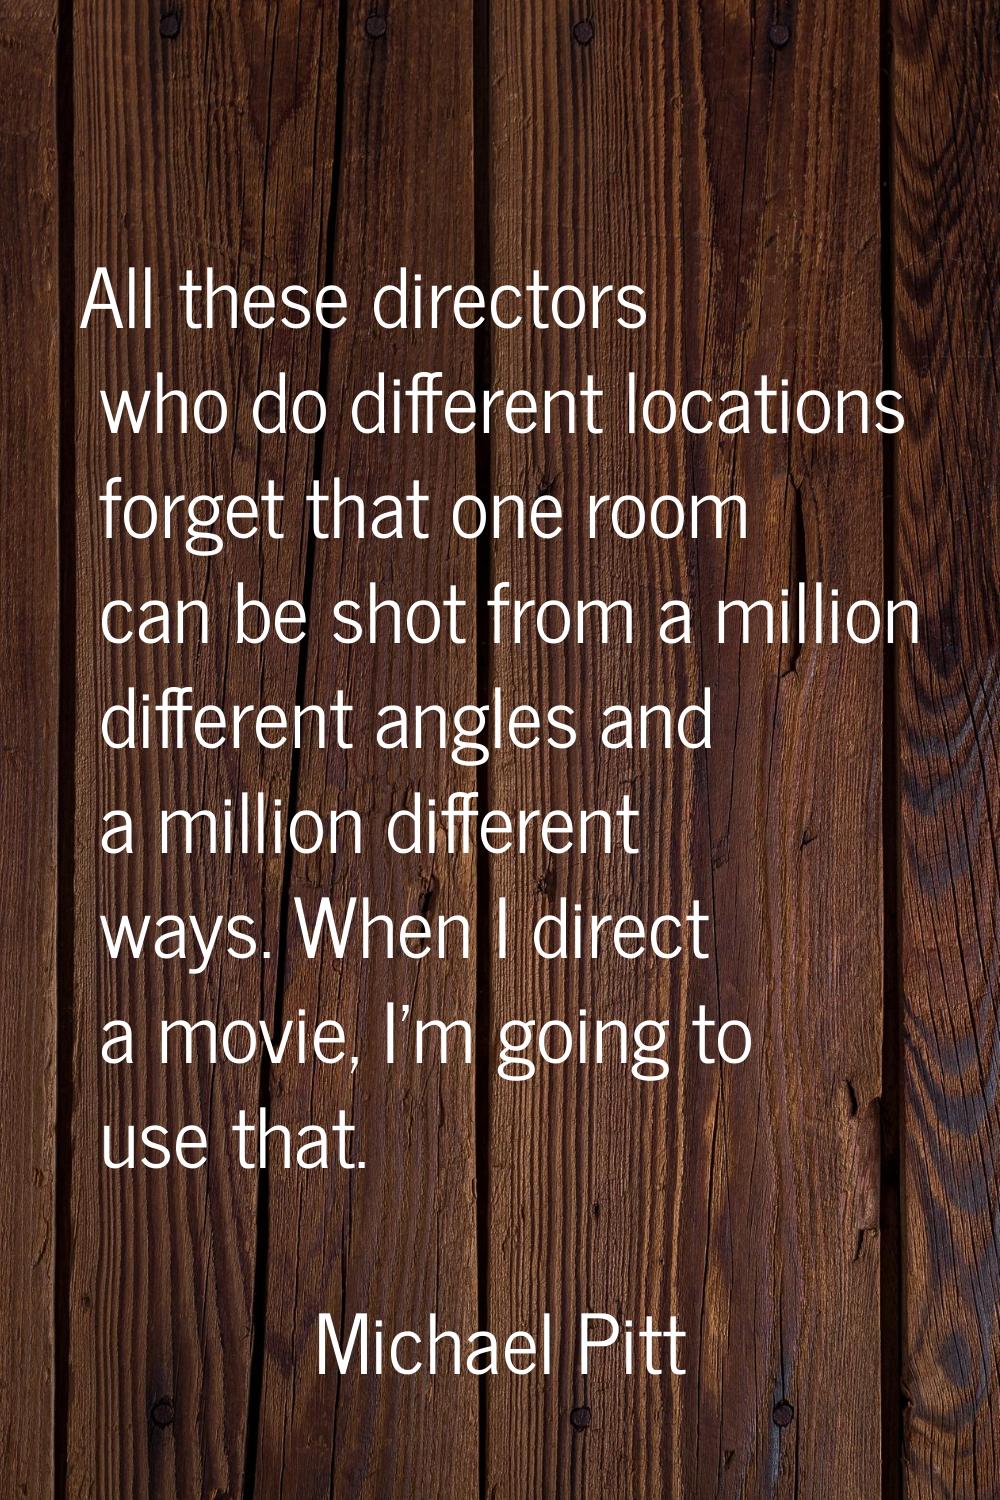 All these directors who do different locations forget that one room can be shot from a million diff